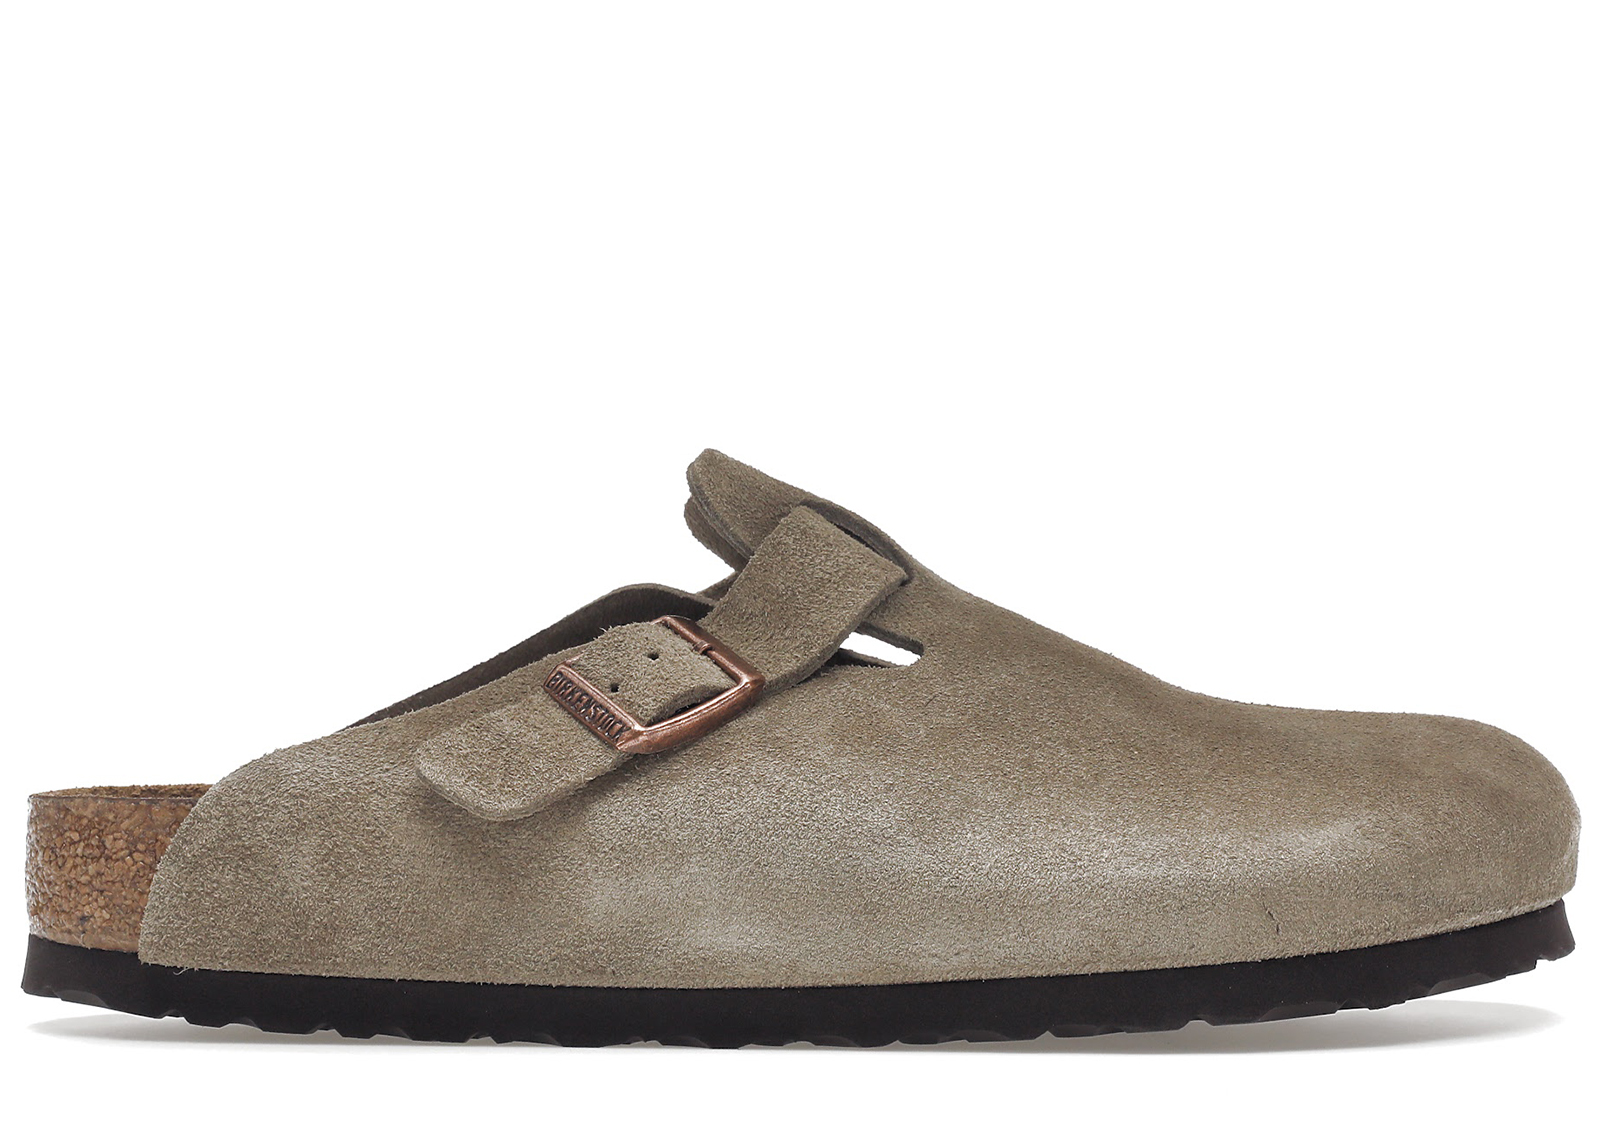 Birkenstock Boston Soft Footbed Suede Taupe - 0560771 - US